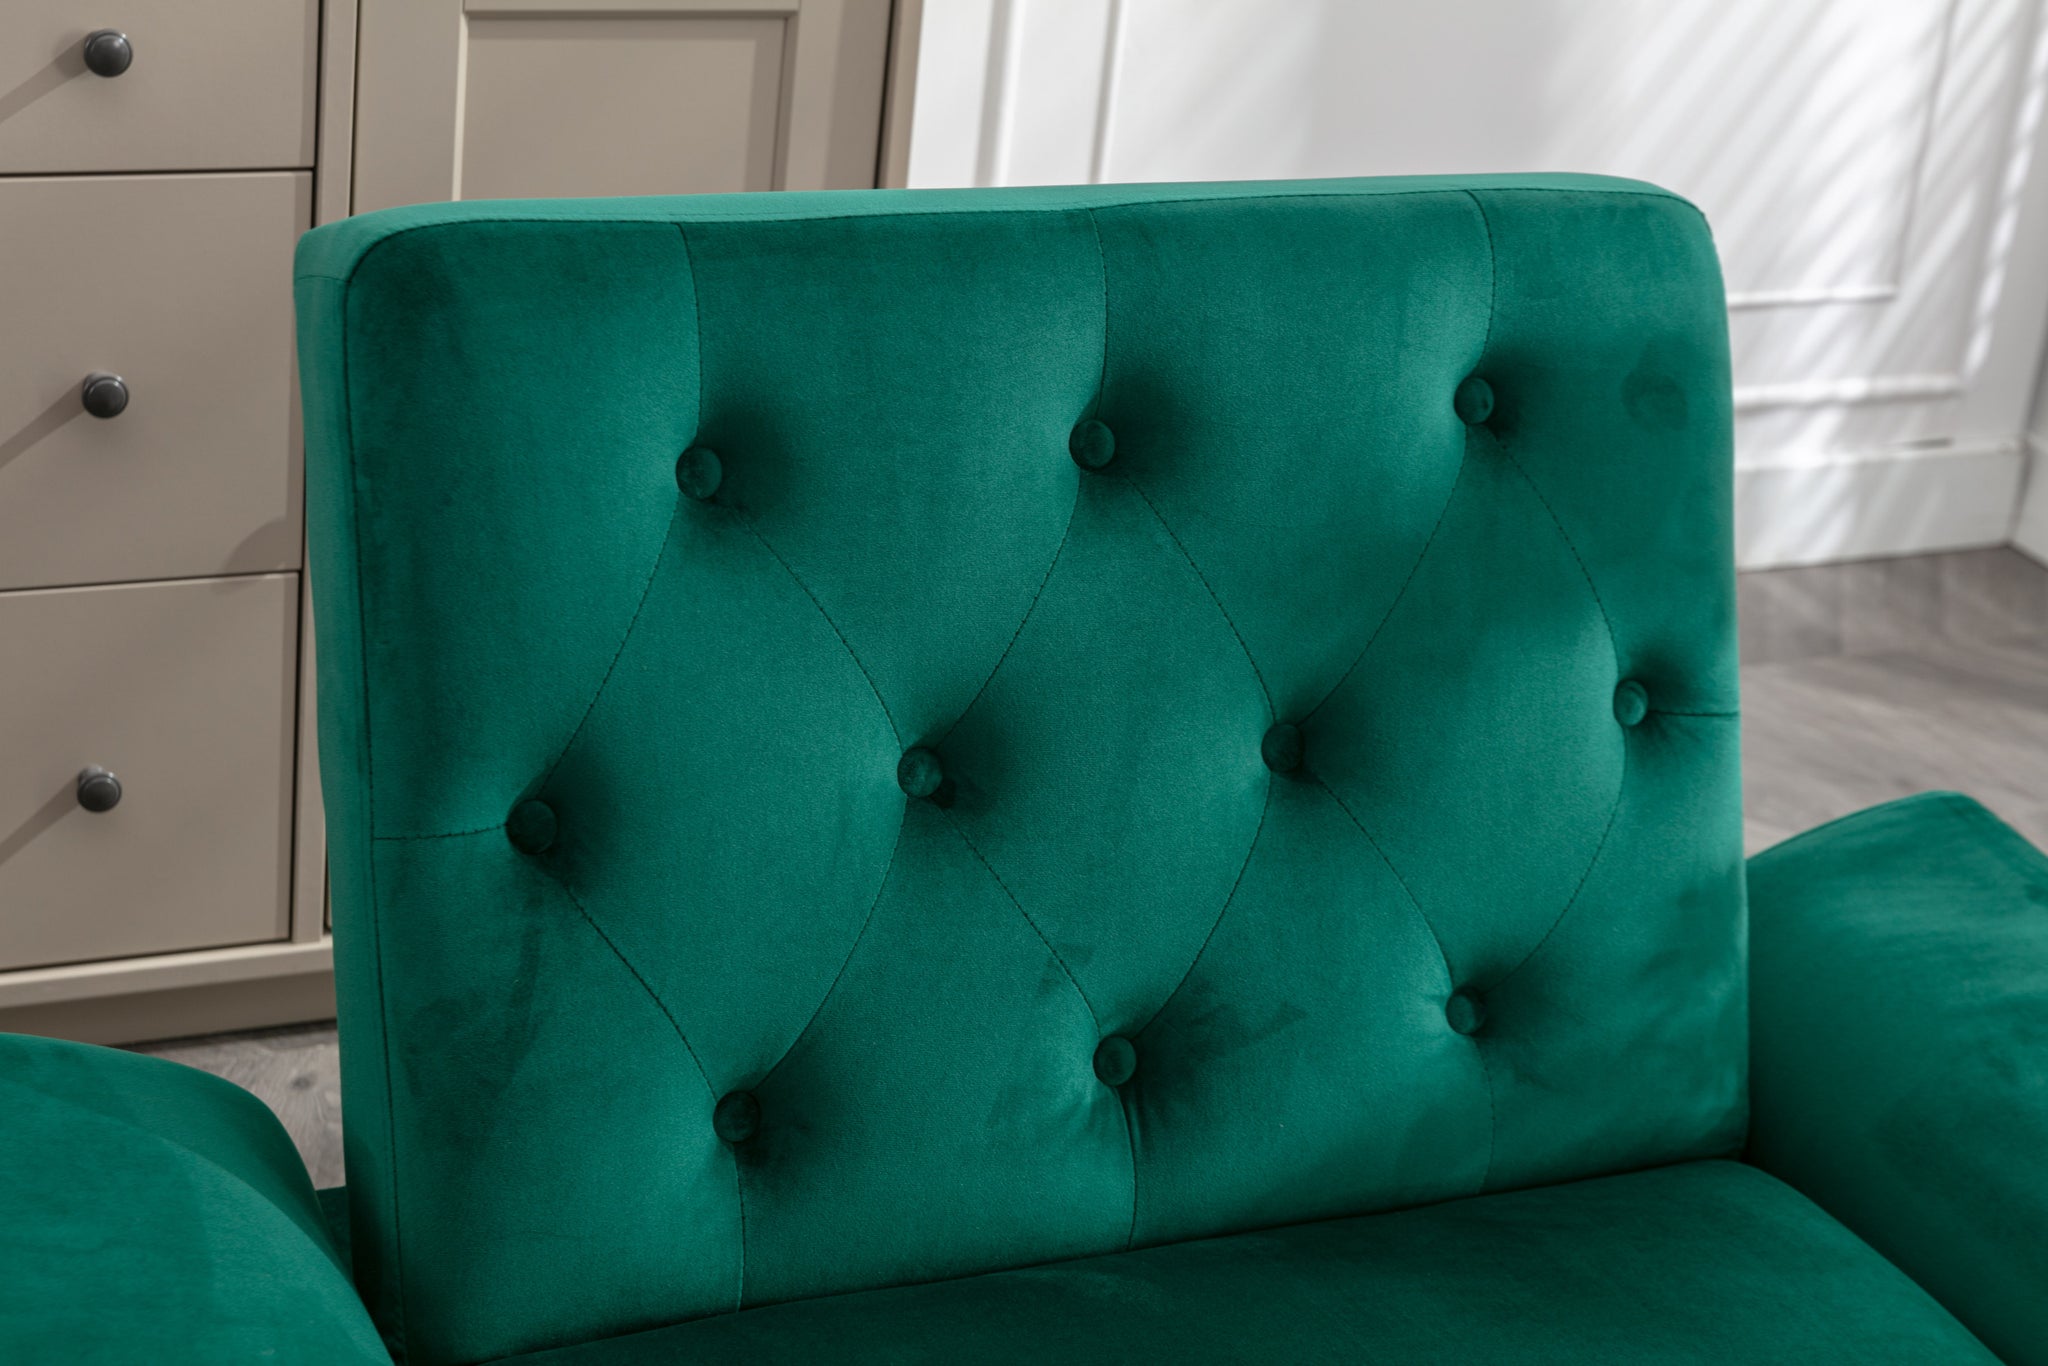 COOLMORE Velvet Accent Chair with Adjustable Armrests green-metal